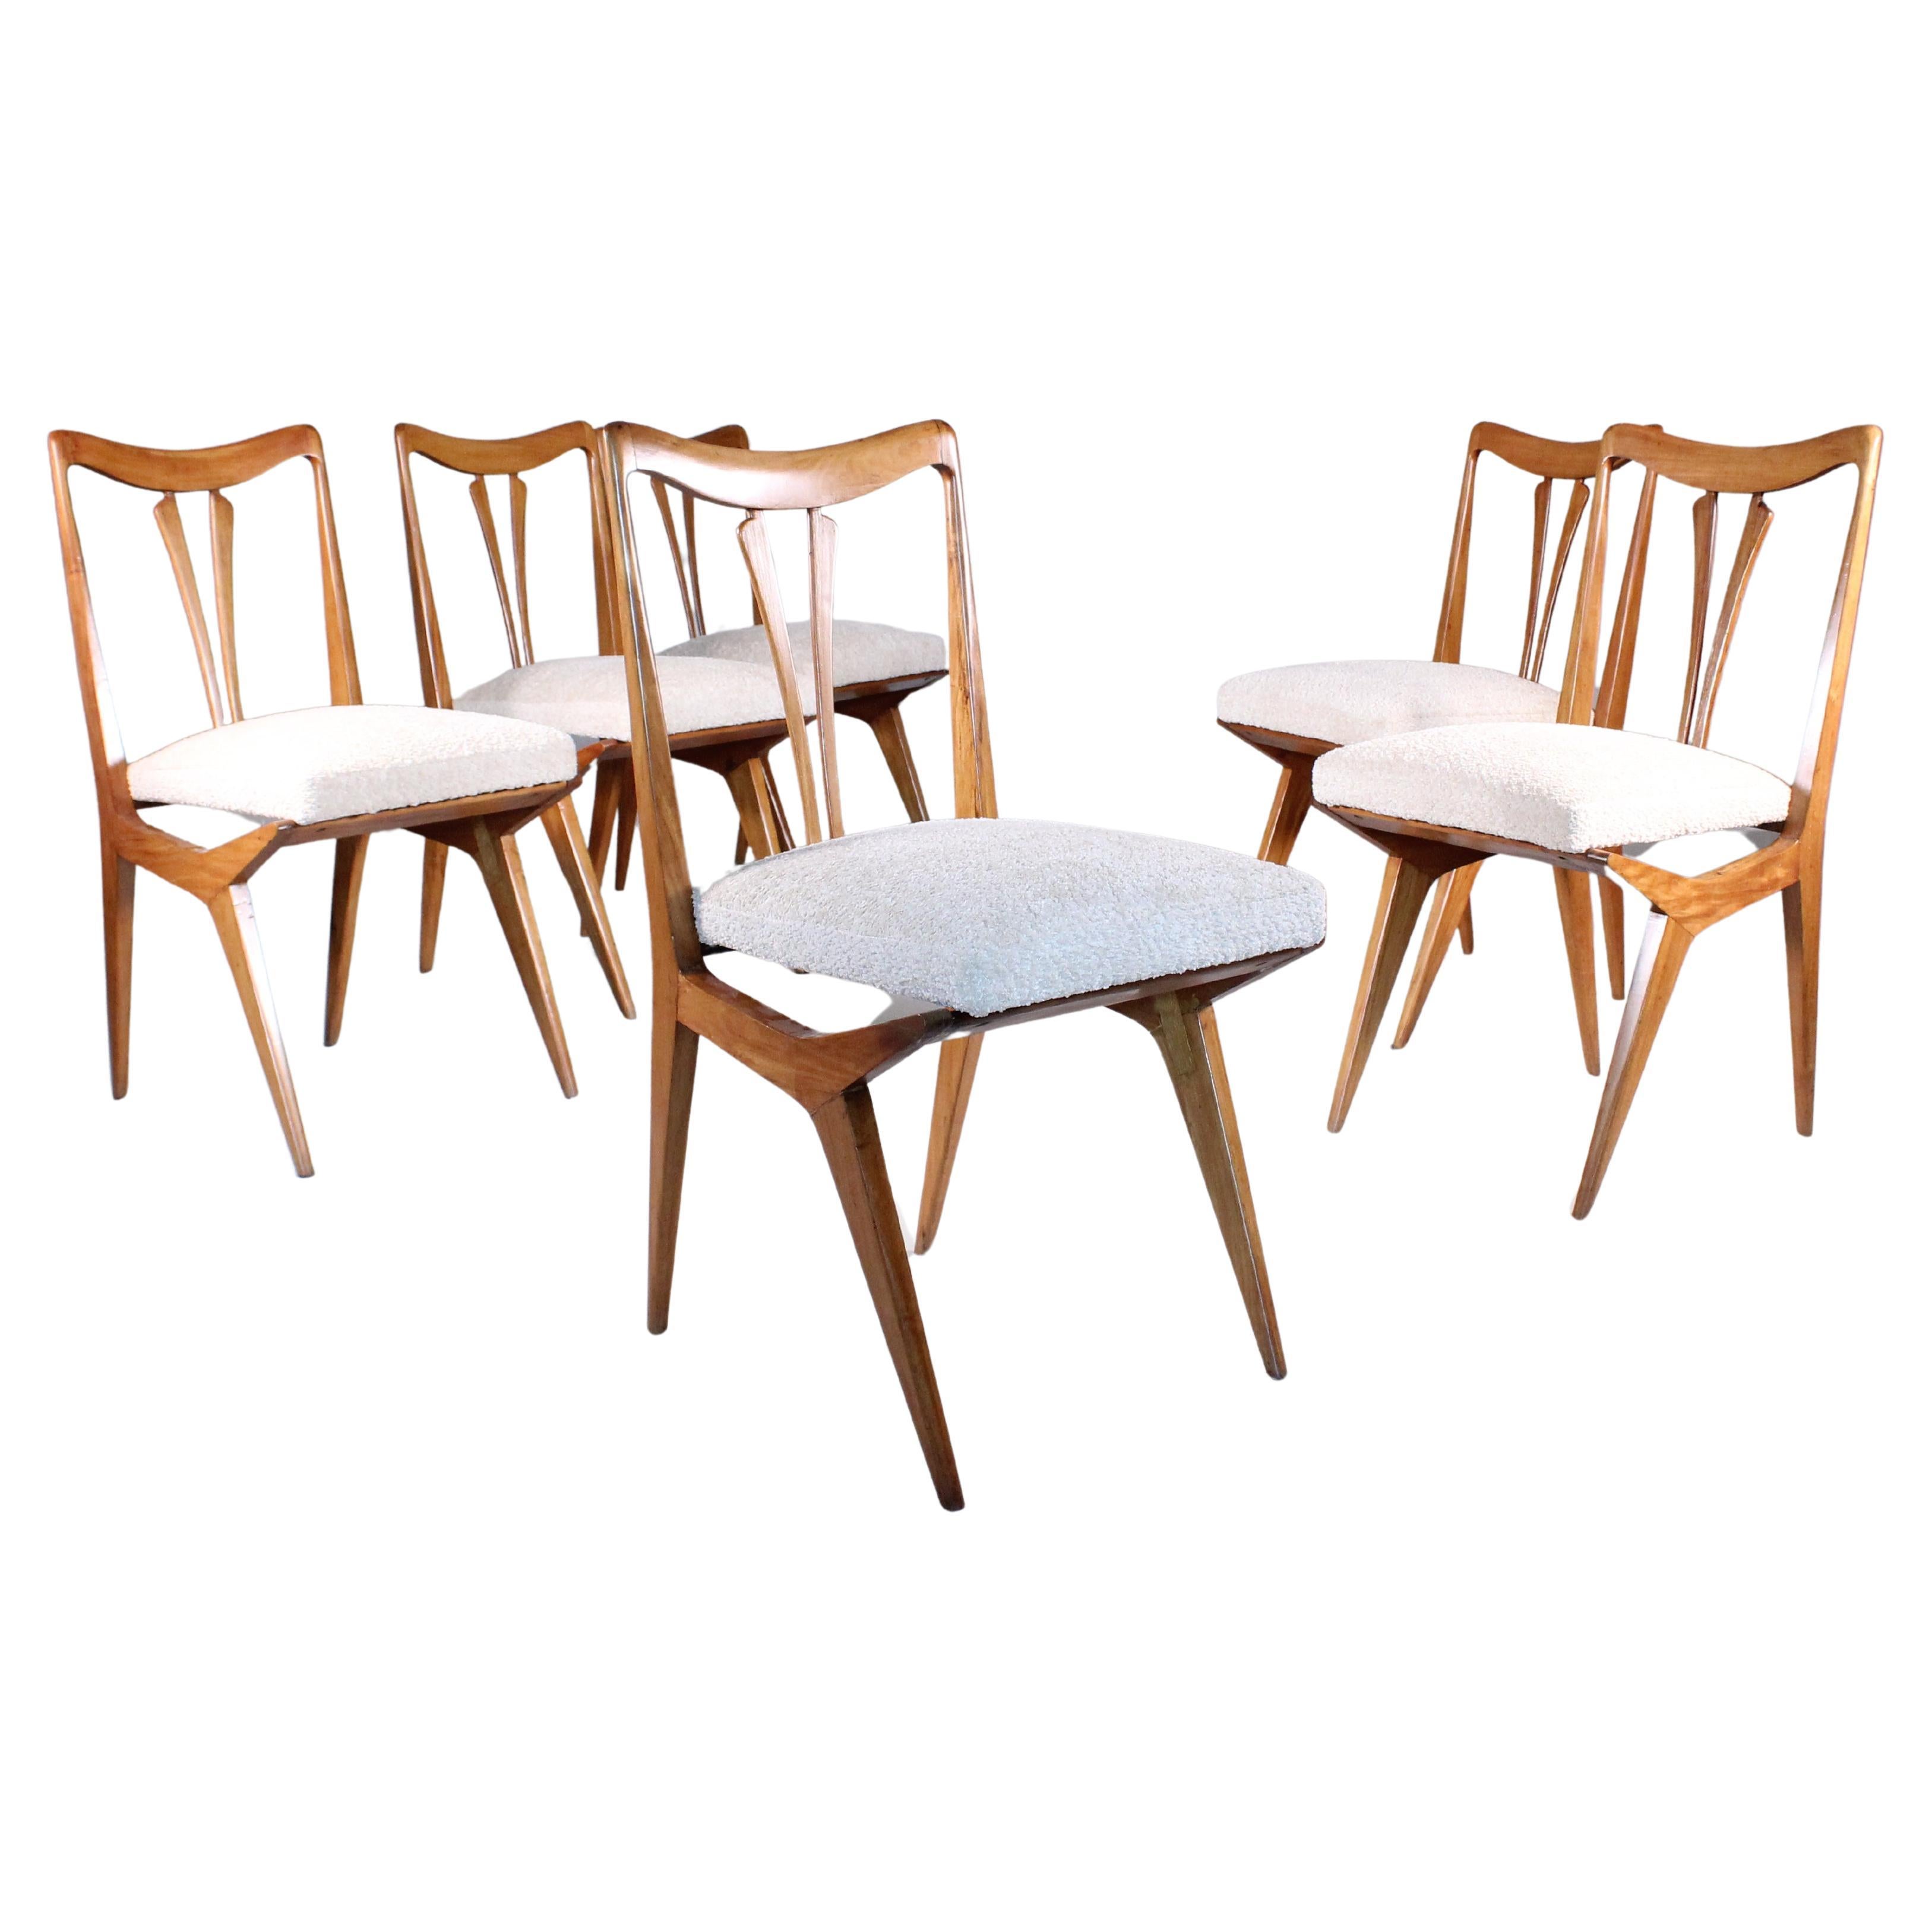 Set of 6 chairs, Giuseppe Scapinelli 